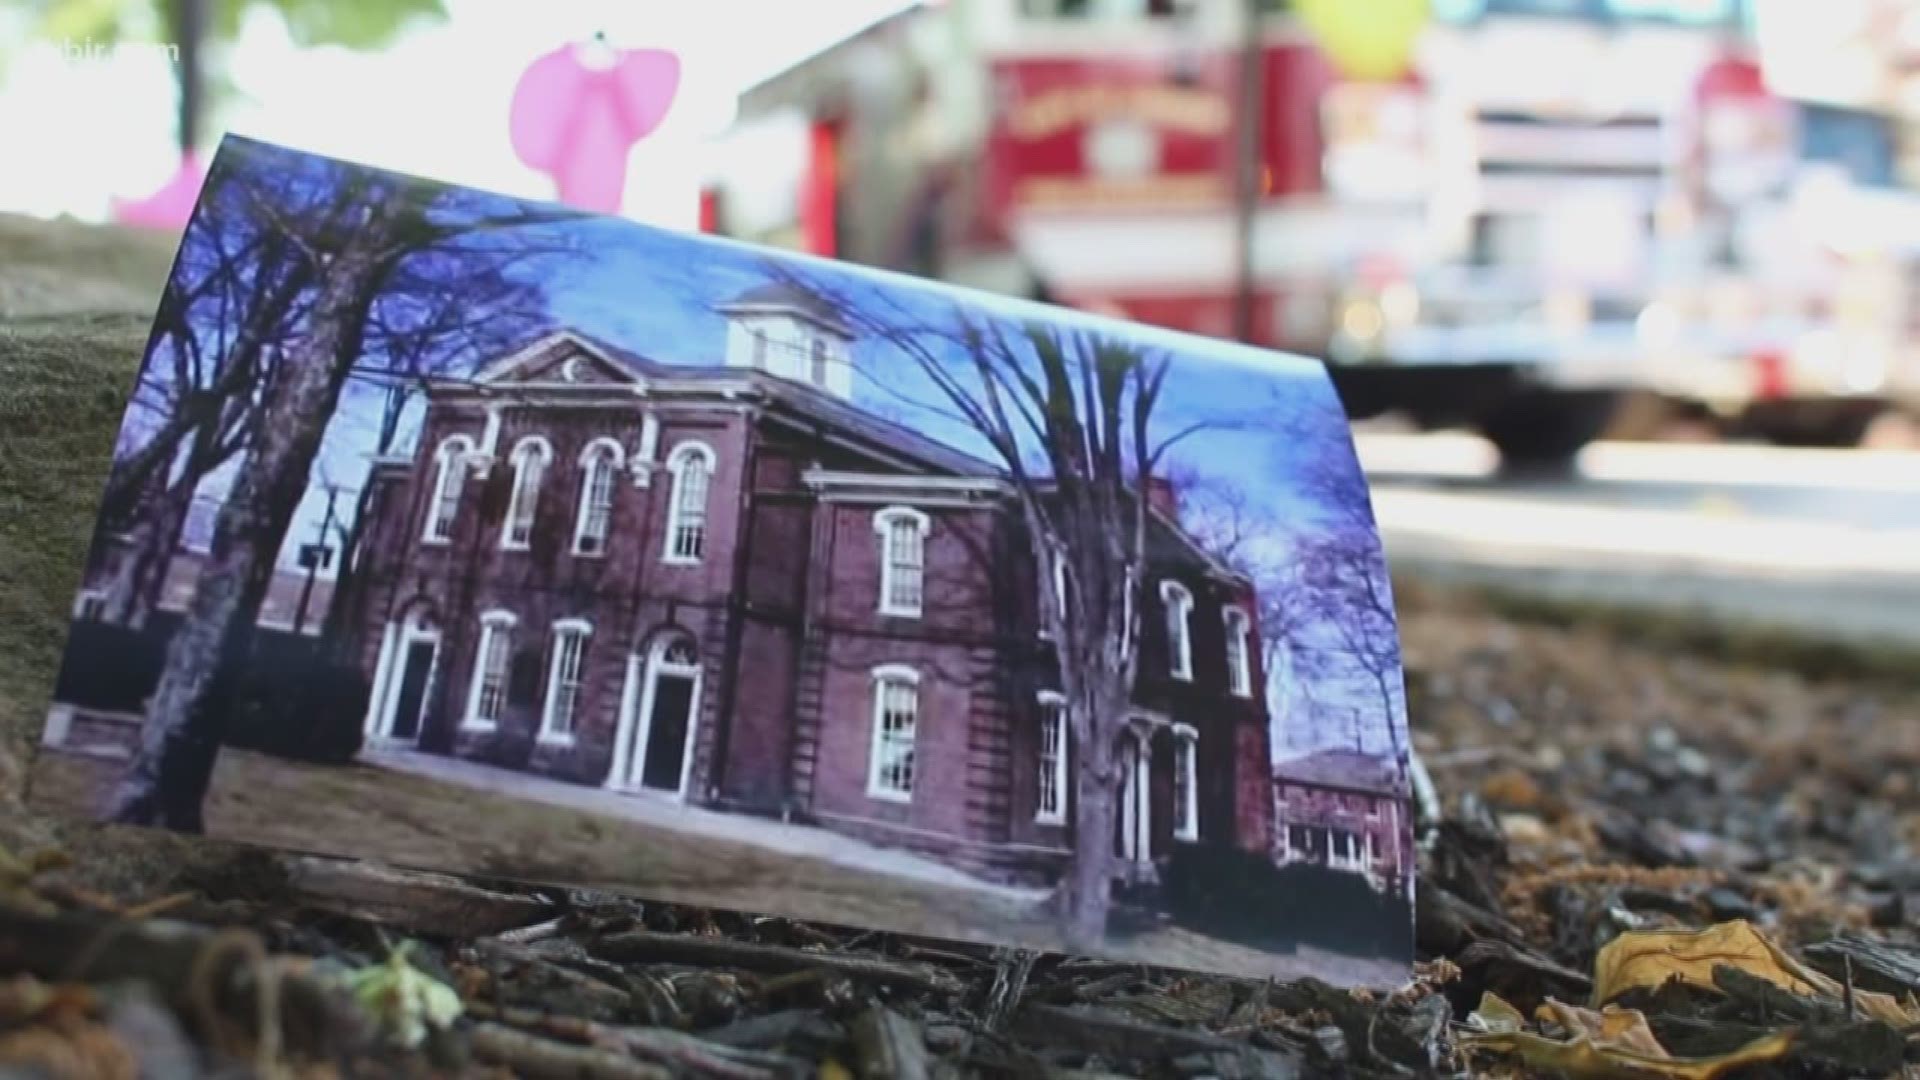 People across East Tennessee are mourning the loss of the Loudon County courthouse after a devastating fire.